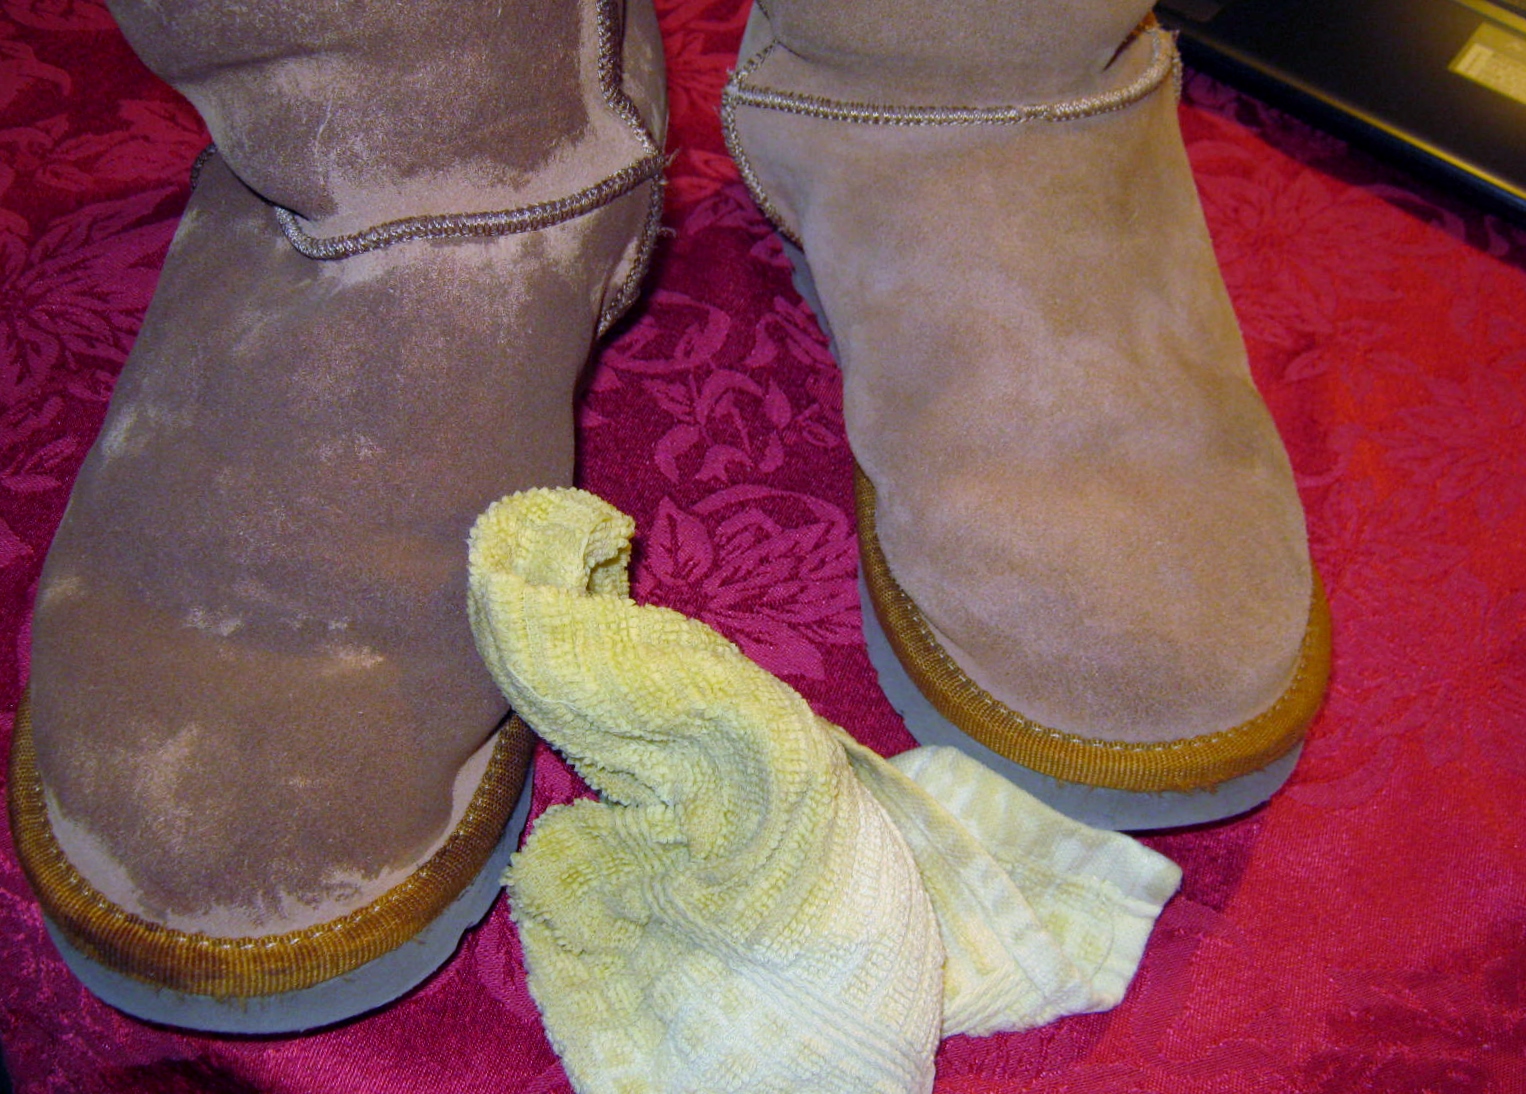 how do you get water stains out of ugg boots